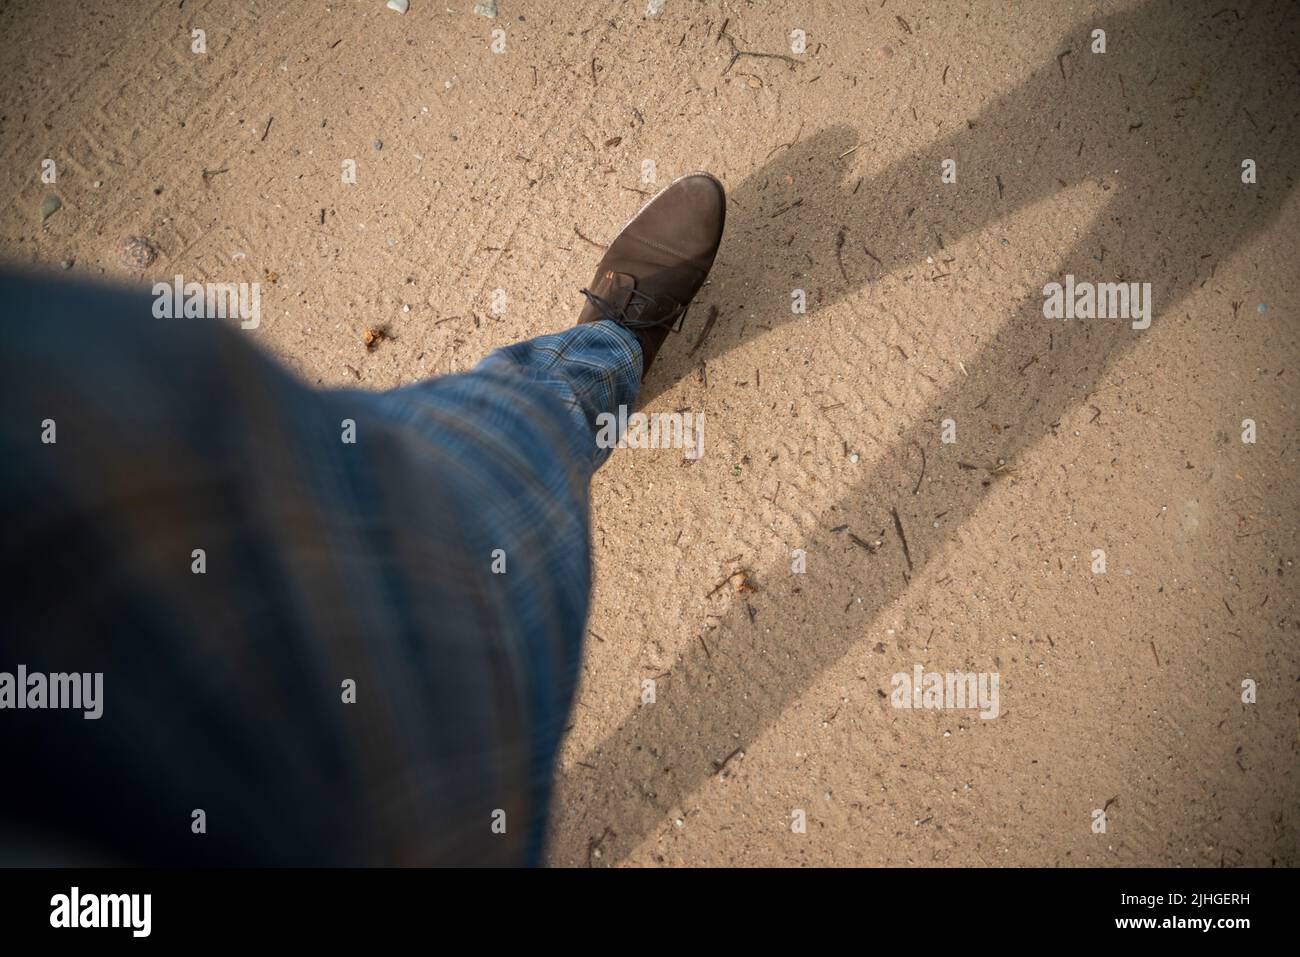 Close-up and overhead view of male businessman brown shoes walking on dirt road. Stock Photo